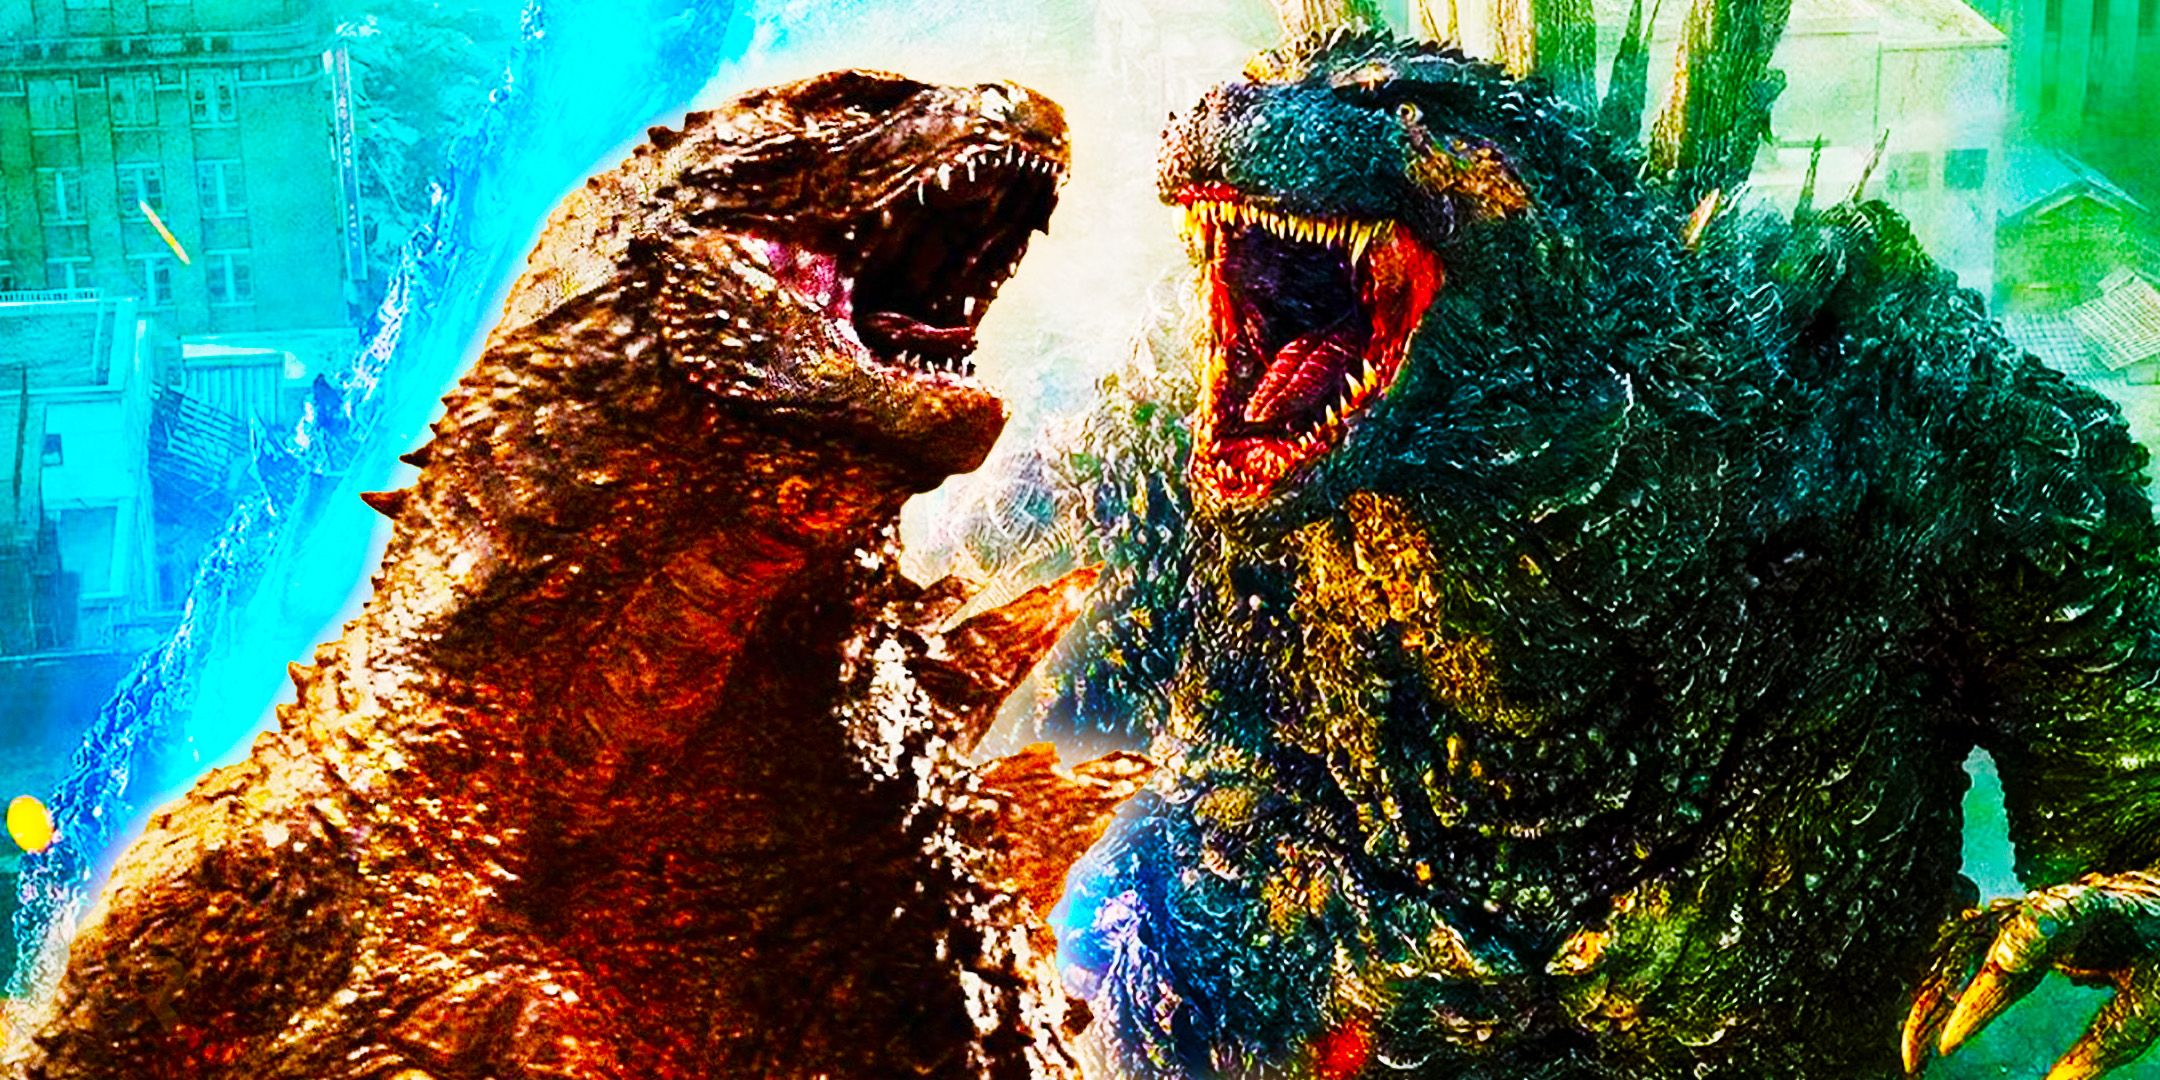 Two different versions of Godzilla screaming in their respective movies